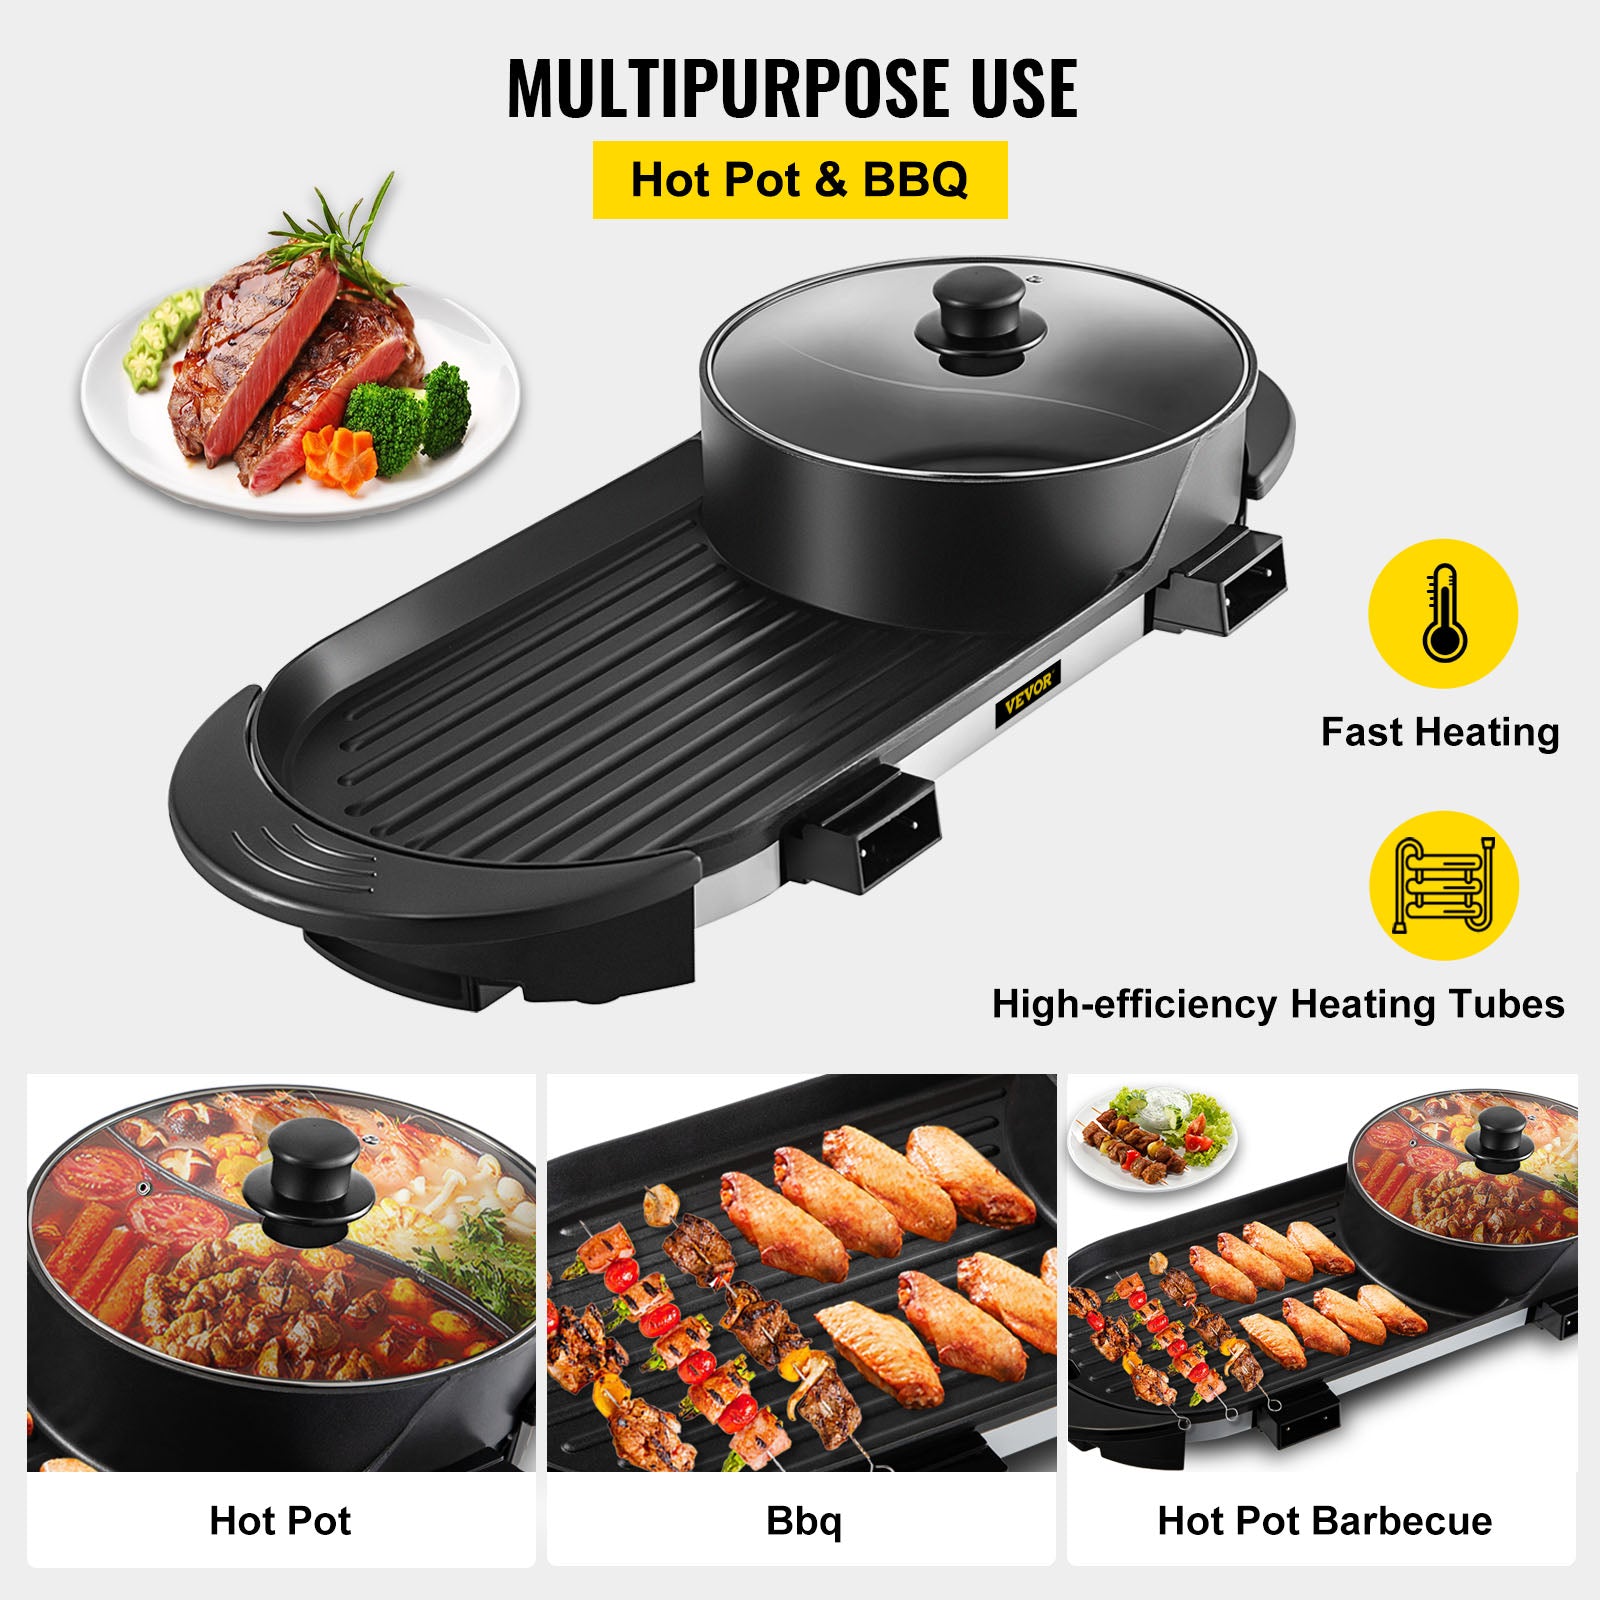 Multifunctional Non-stick cooking Tray - The Trend